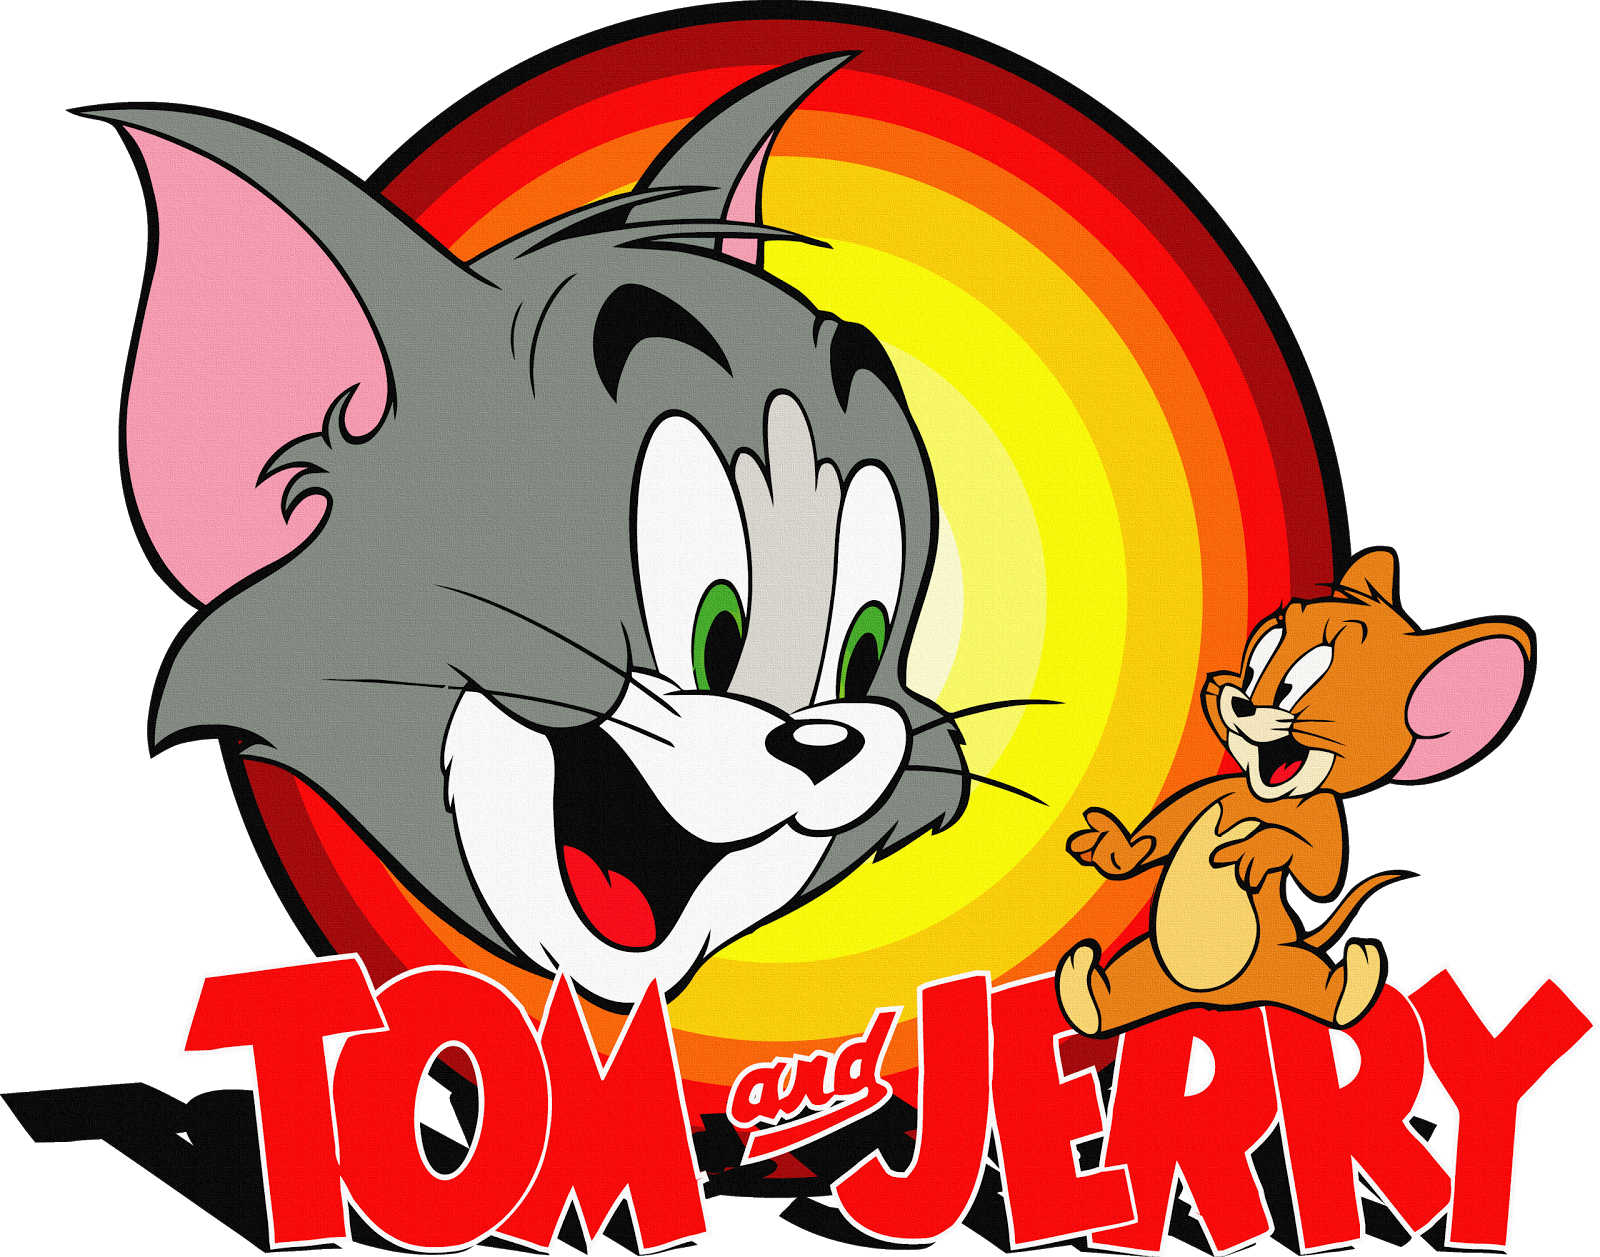 Tom and Jerry PNG images free download.